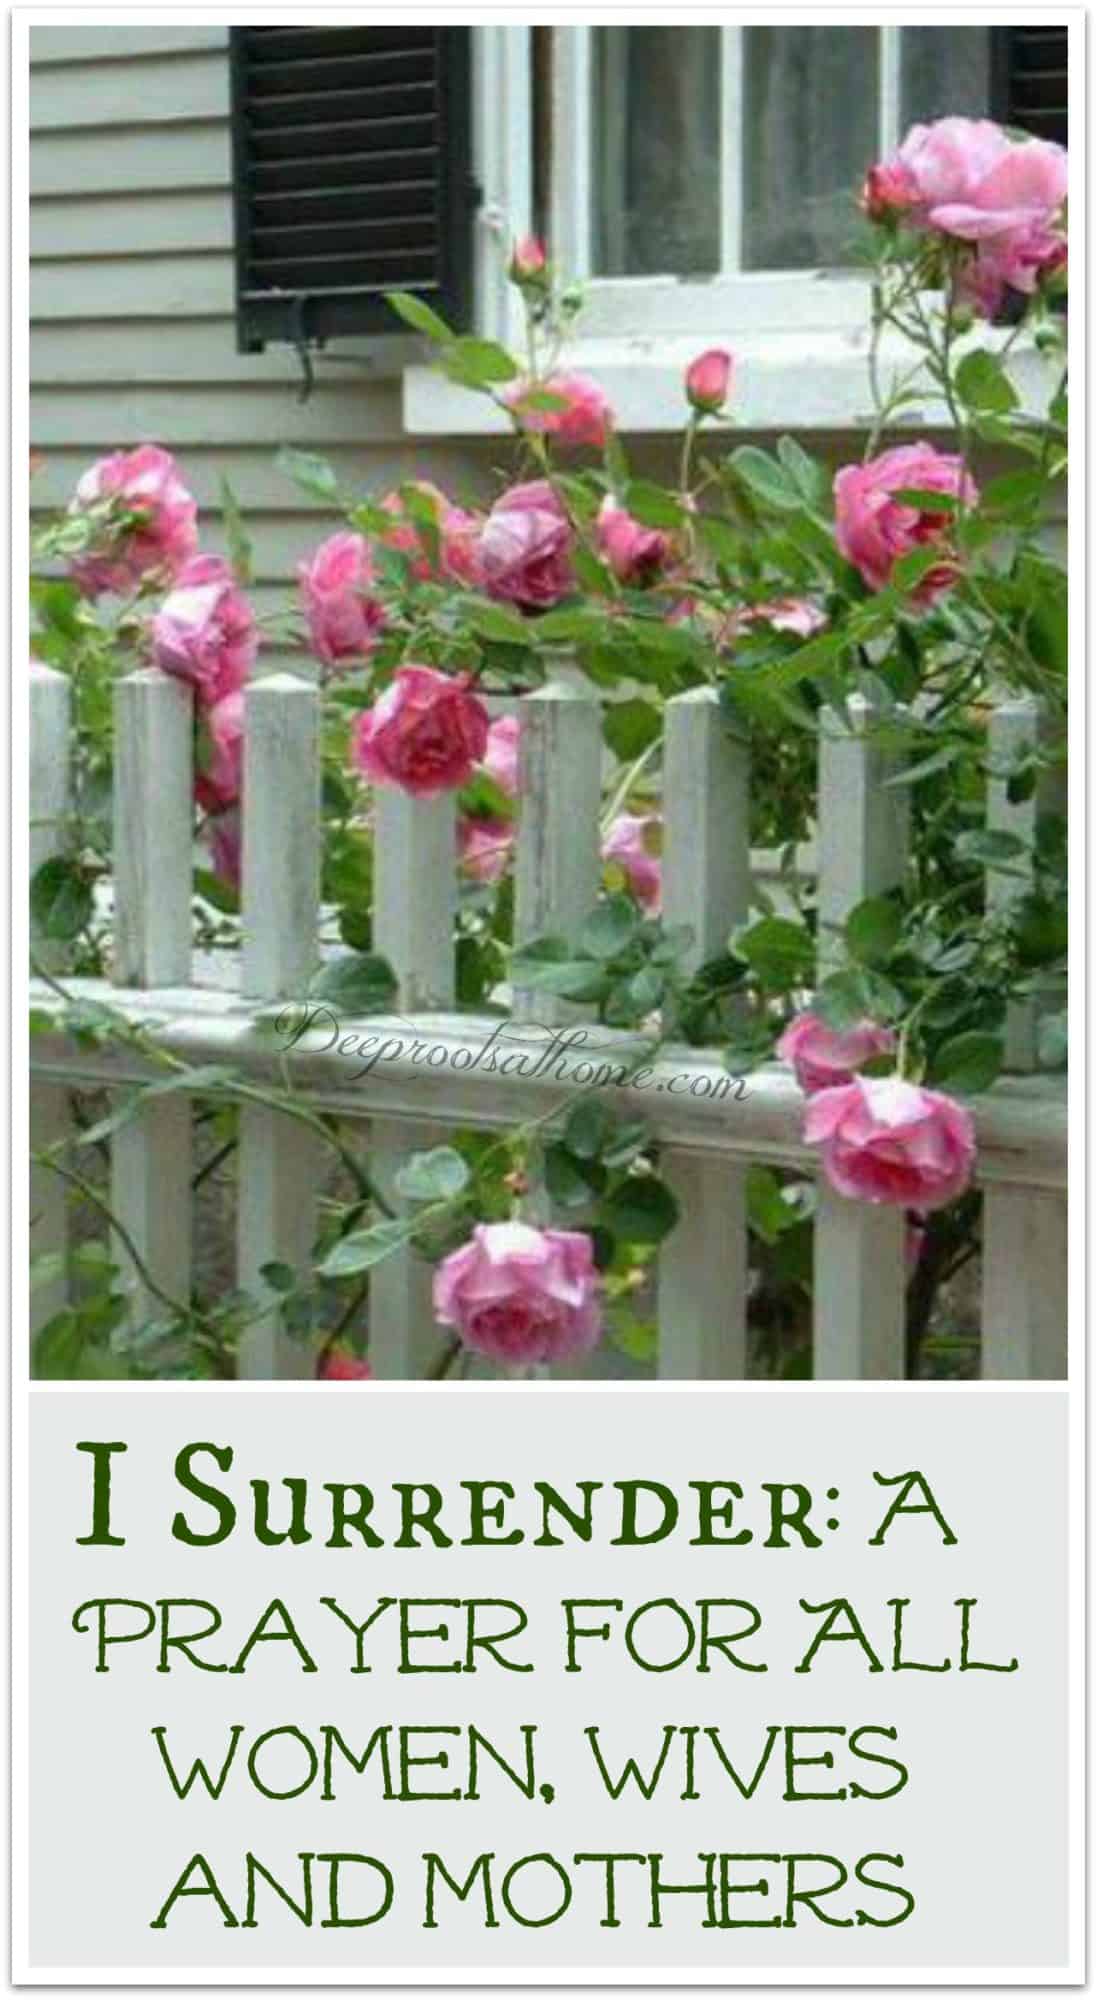 I Surrender: A Prayer For All Women, Wives and Mothers. pink roses